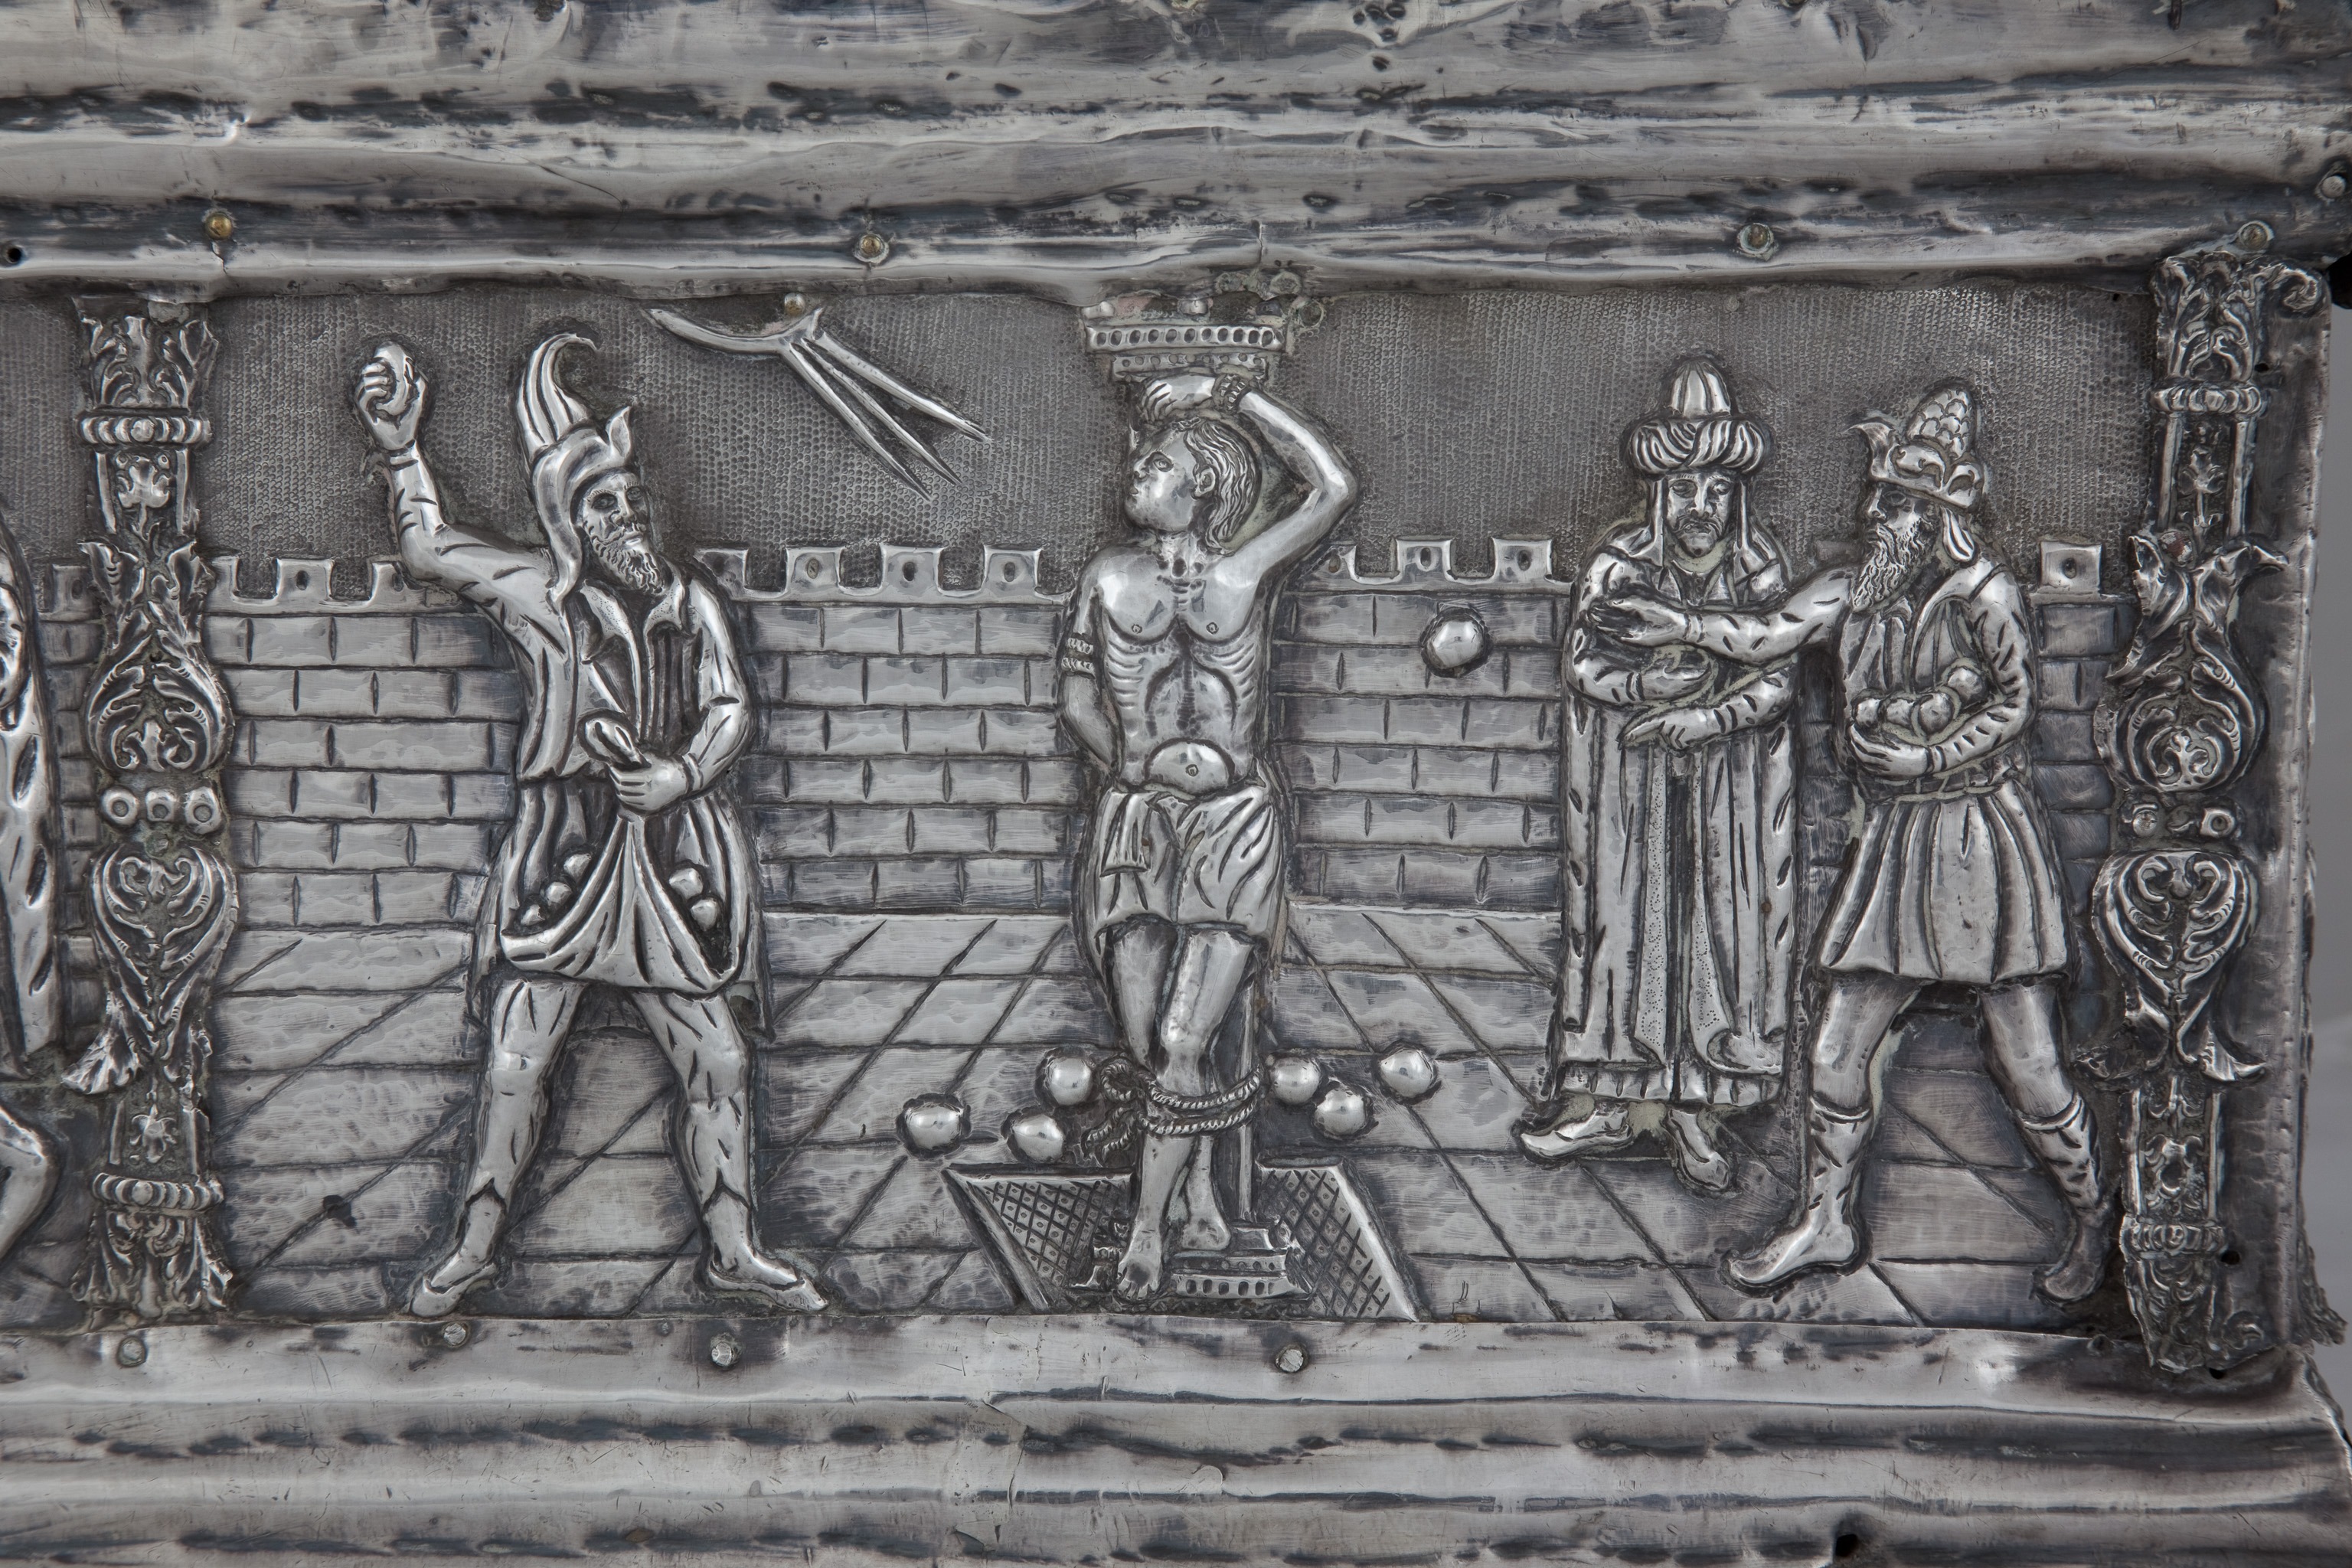 Detail of the stoning of St. Tryphon, Reliquary Casket of St. Tryphon, ca. 1539, Cathedral of St. Tryphon, Kotor (source: S. Kordić)